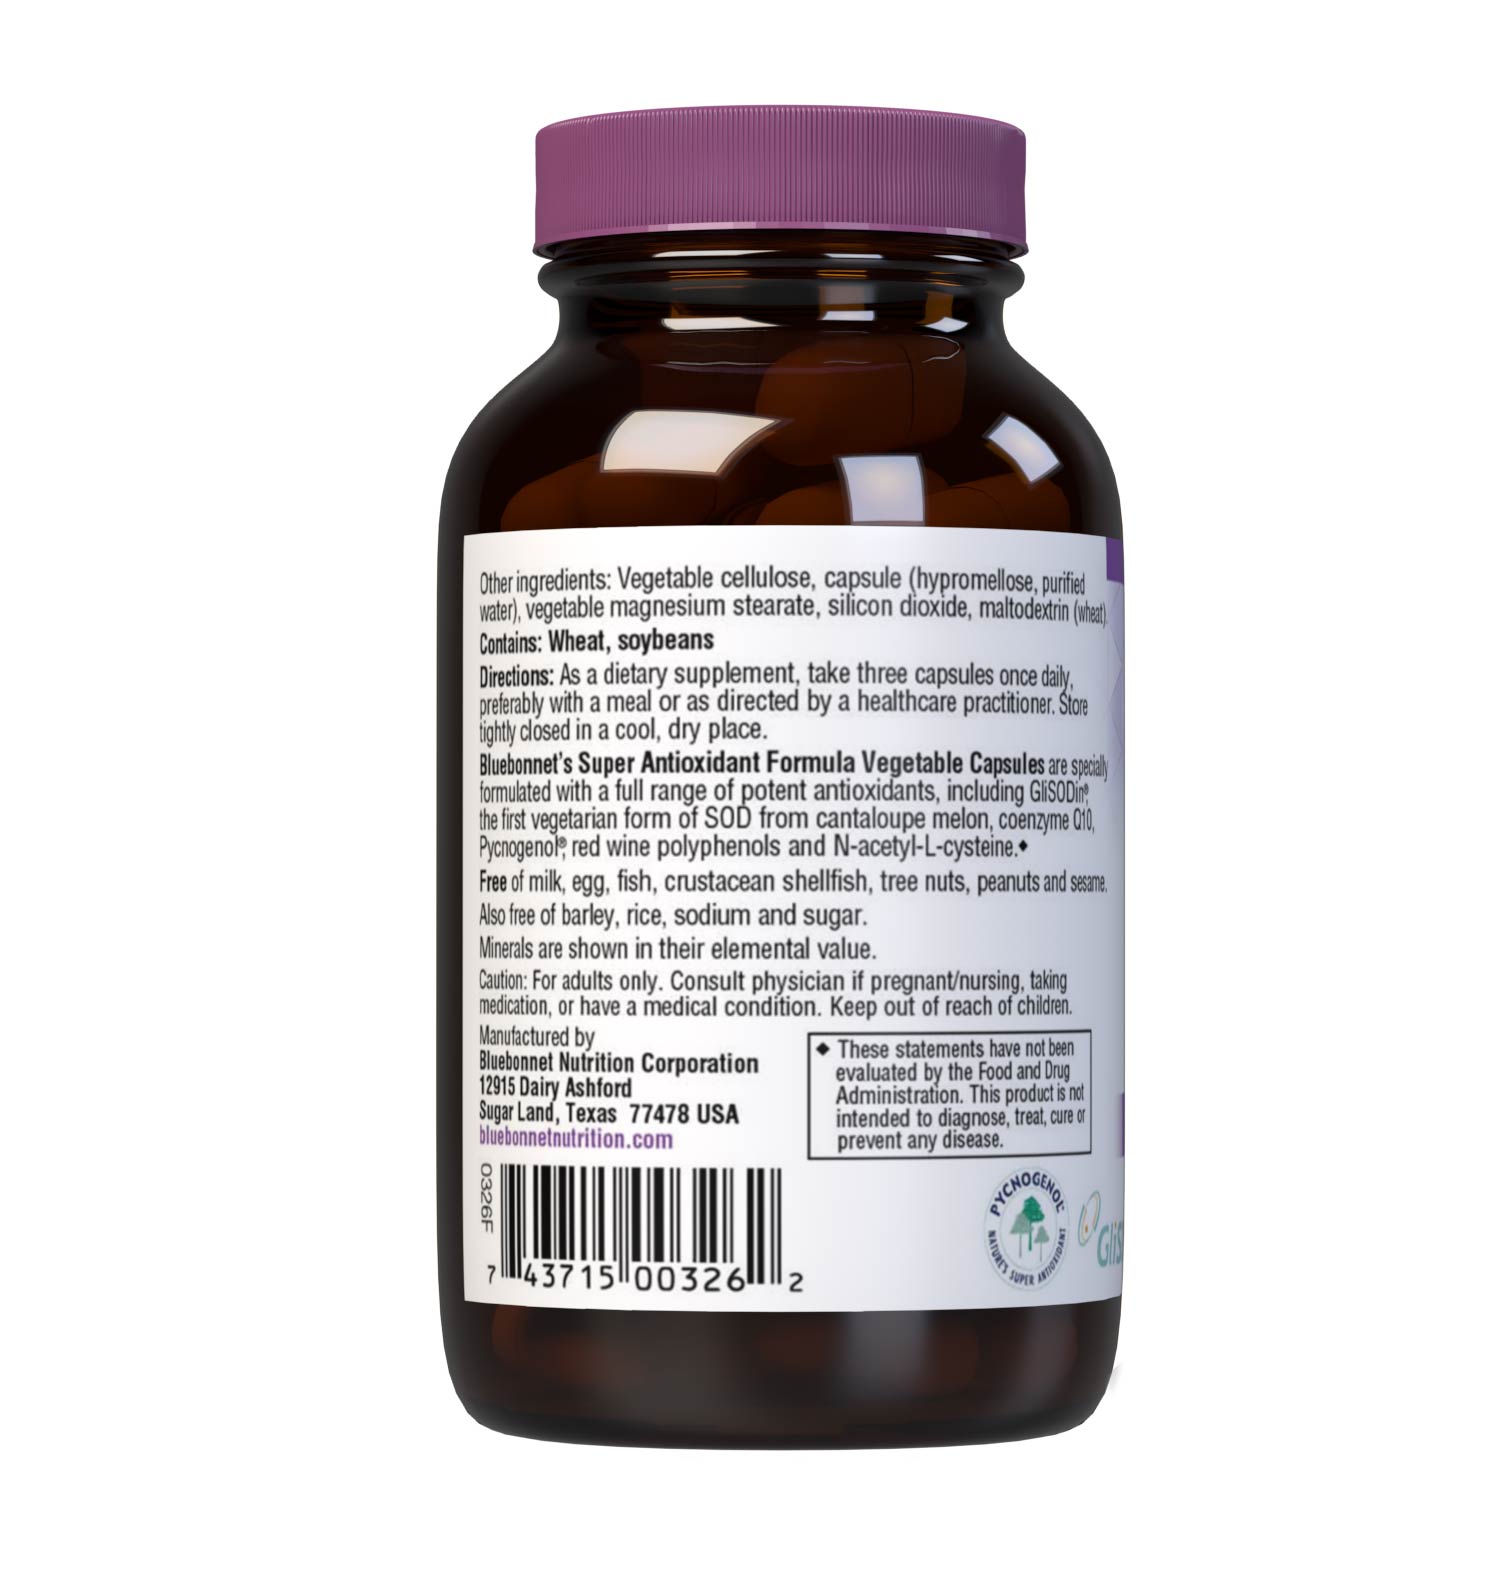 Bluebonnet’s Super Antioxidant Formula 60 Vegetable Capsules are specially formulated with a full range of potent antioxidants, including GliSODin, the first vegetarian form of SOD from cantaloupe melon, and coenzyme Q10, Pycnogenol, red wine polyphenols and N-acetyl-L-cysteine. Description panel. #size_60 count